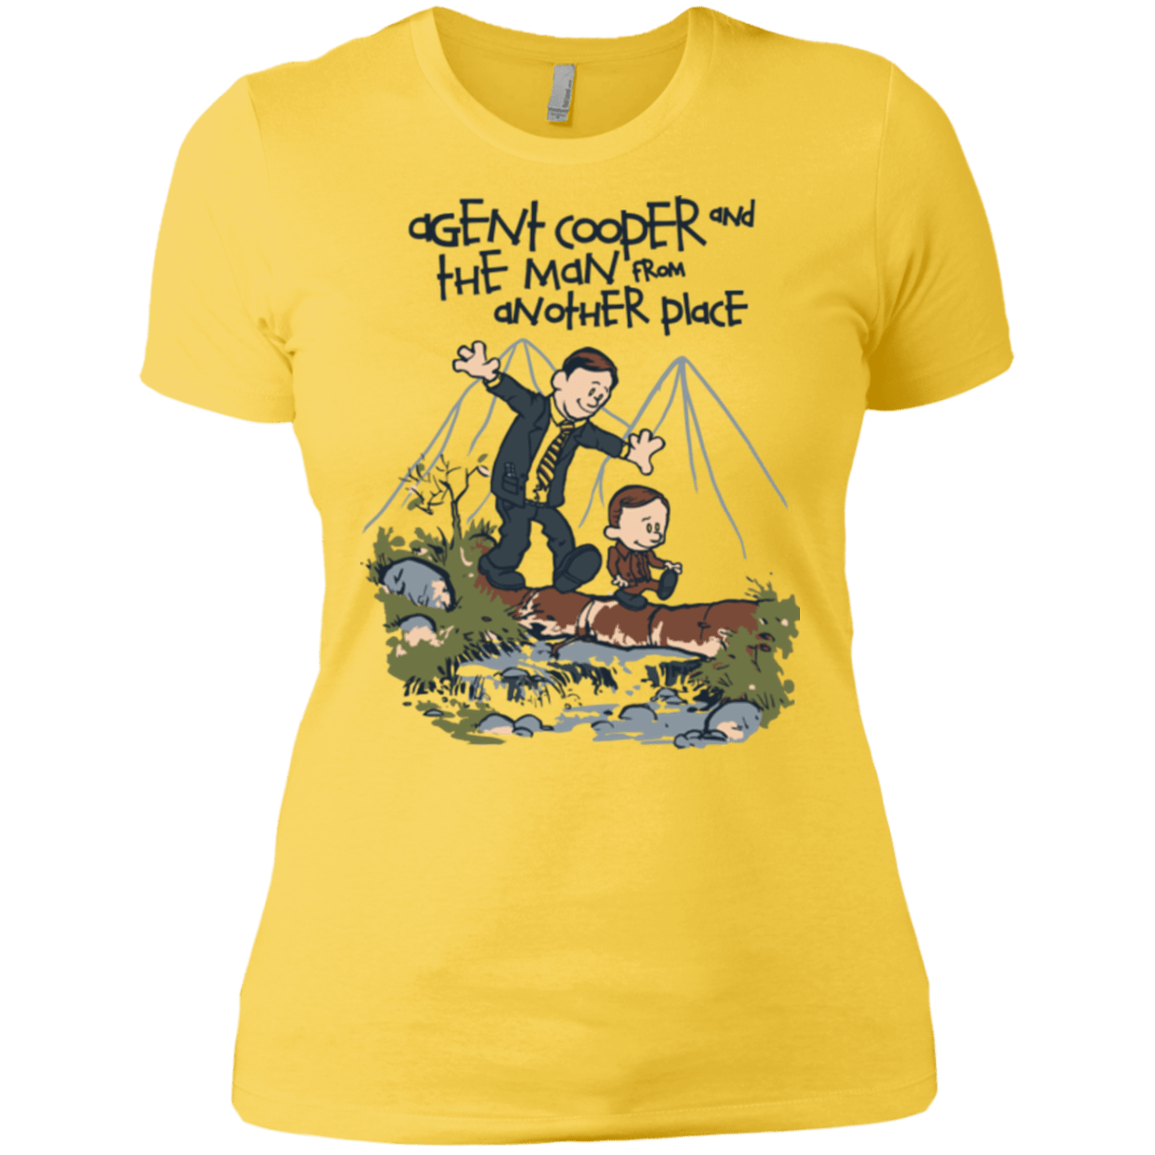 T-Shirts Vibrant Yellow / X-Small Agent Cooper and Women's Premium T-Shirt